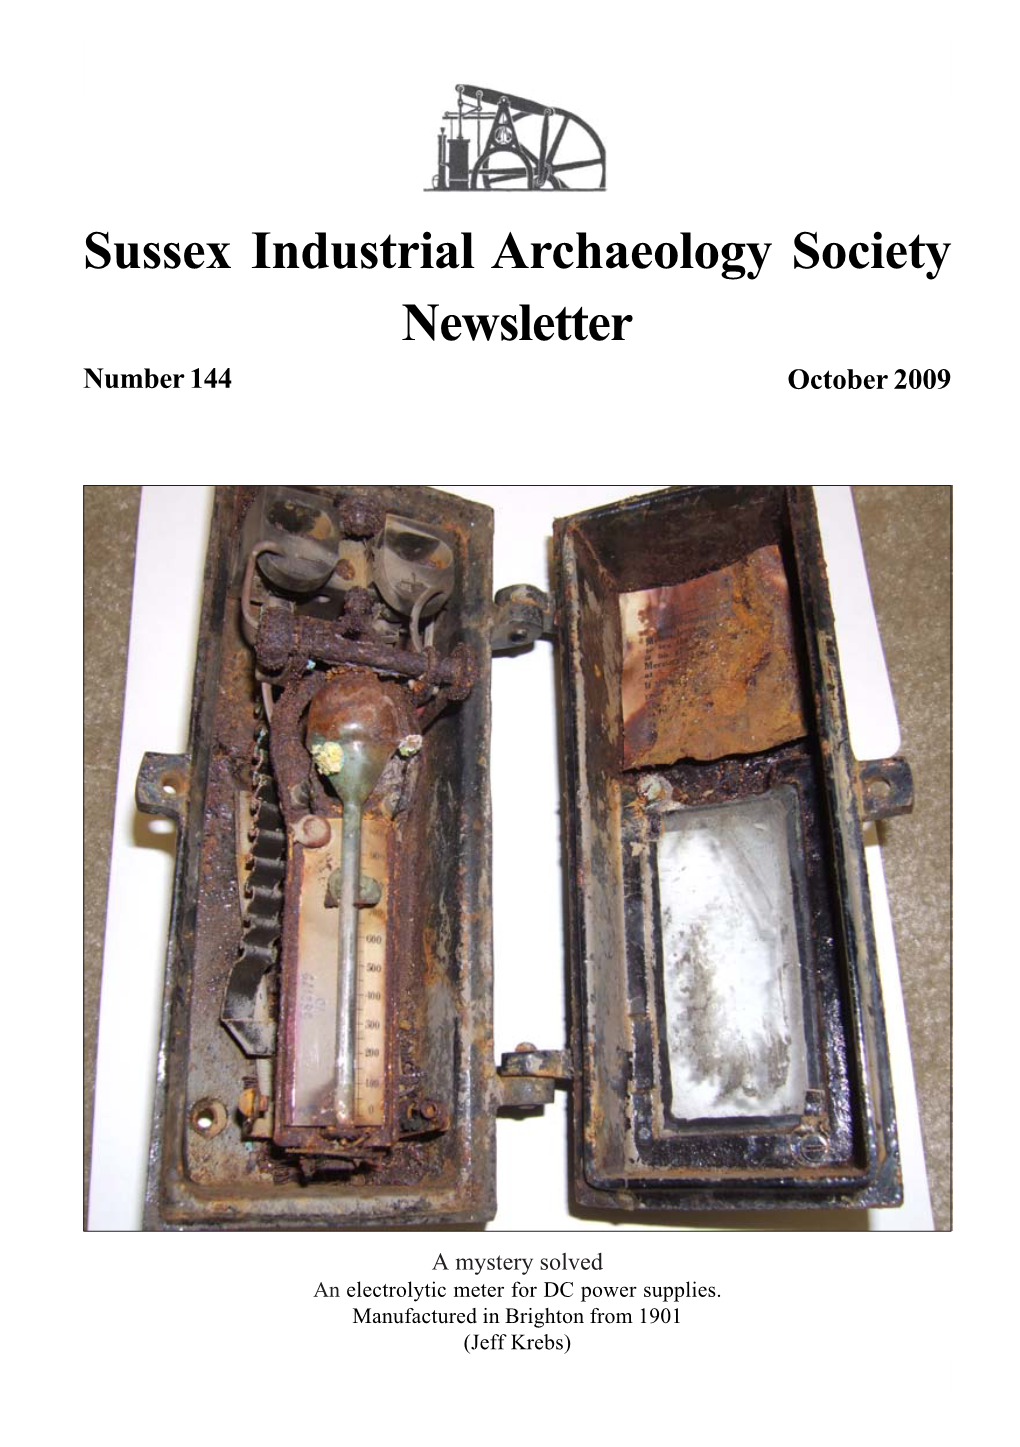 Sussex Industrial Archaeology Society Newsletter Number 144 October 2009